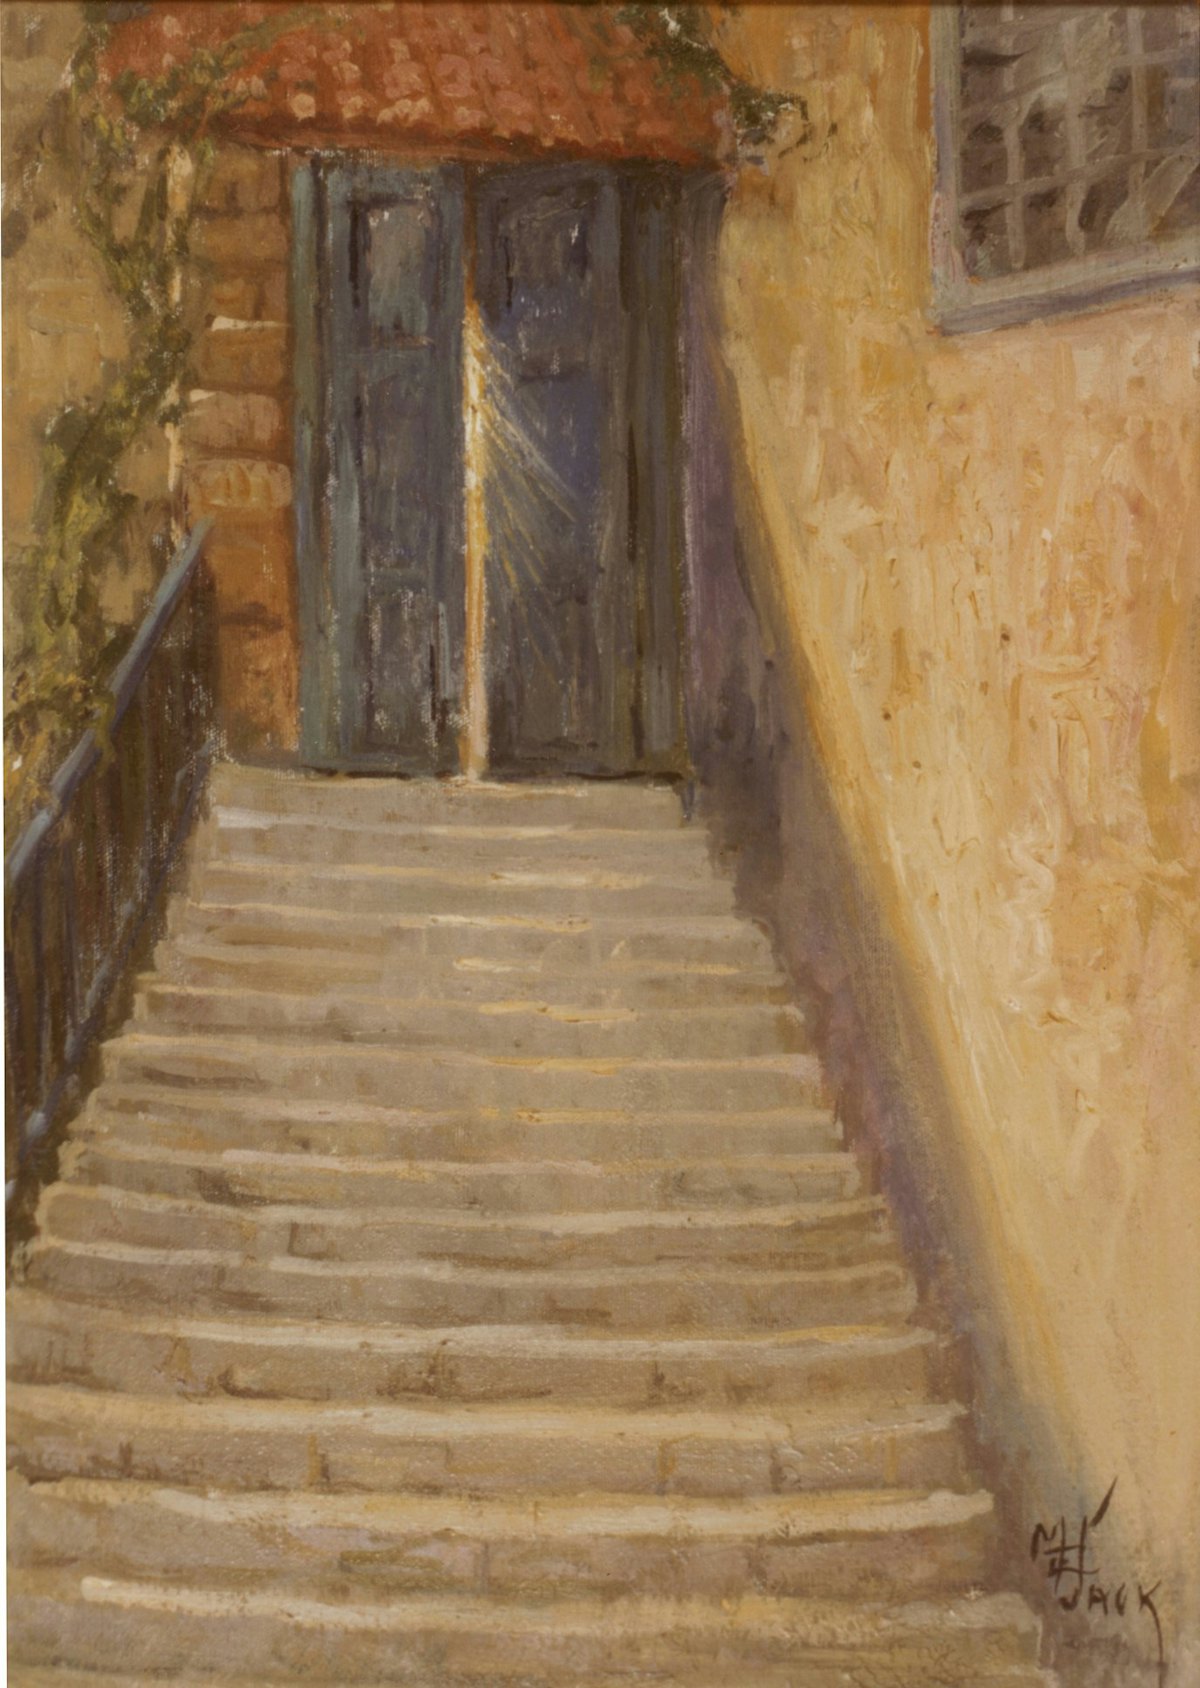 Light shines through the door leading to the living quarters of 'Abdu'l-Baha in Marion Jack's 1908 painting of a scene at the House of 'Abdu'llah Pasha, Acre.